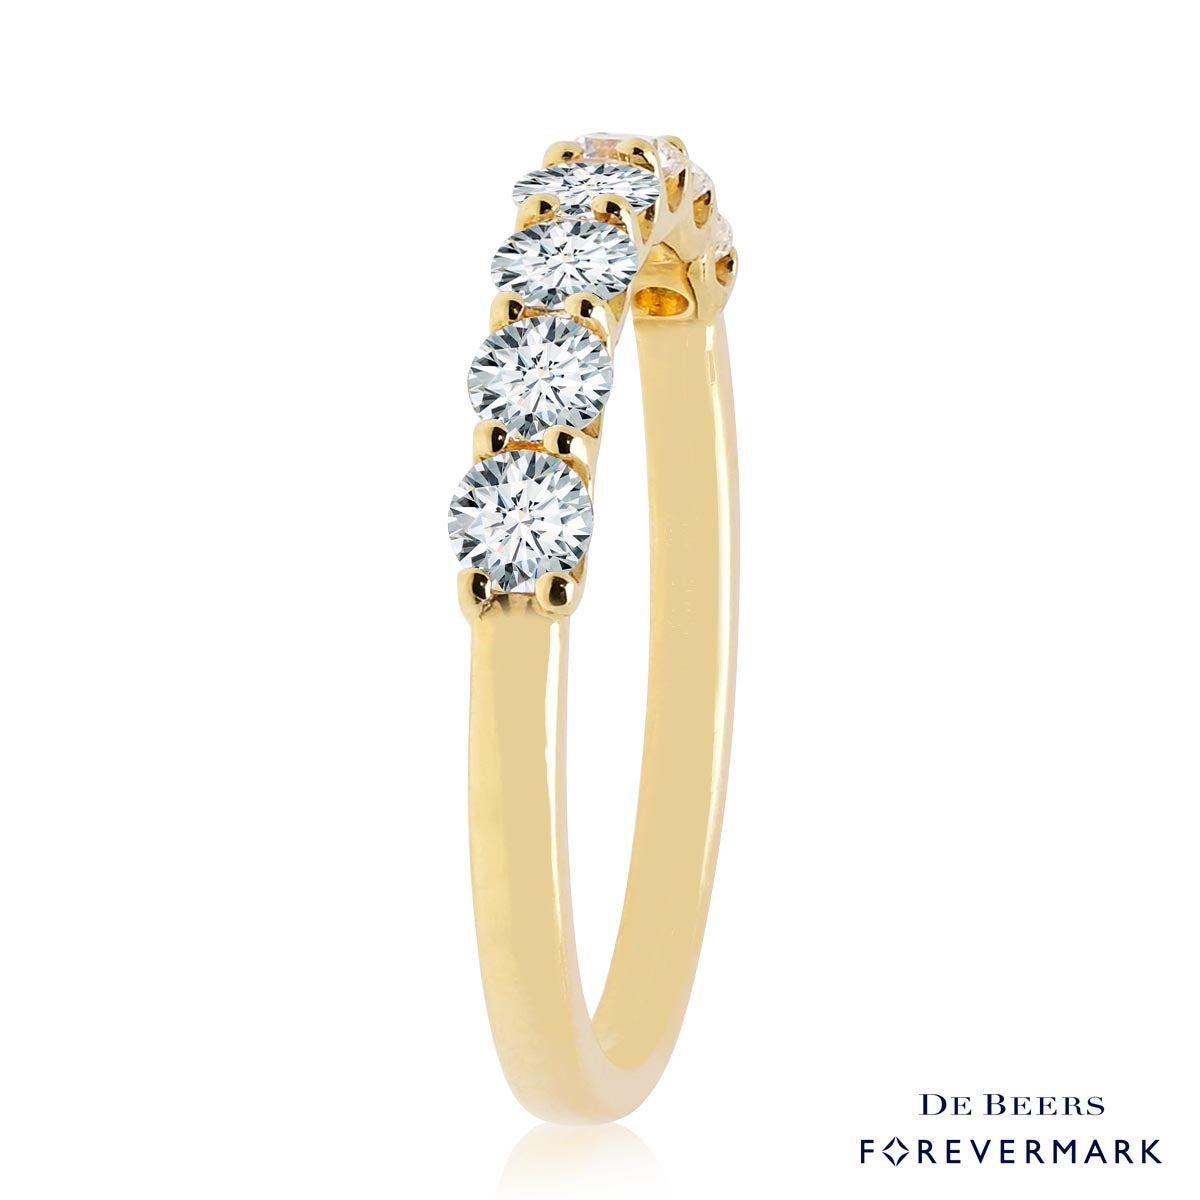 De Beers Forevermark Petite Diamond Channel Wedding Band in 18kt Yellow Gold (3/4ct tw)